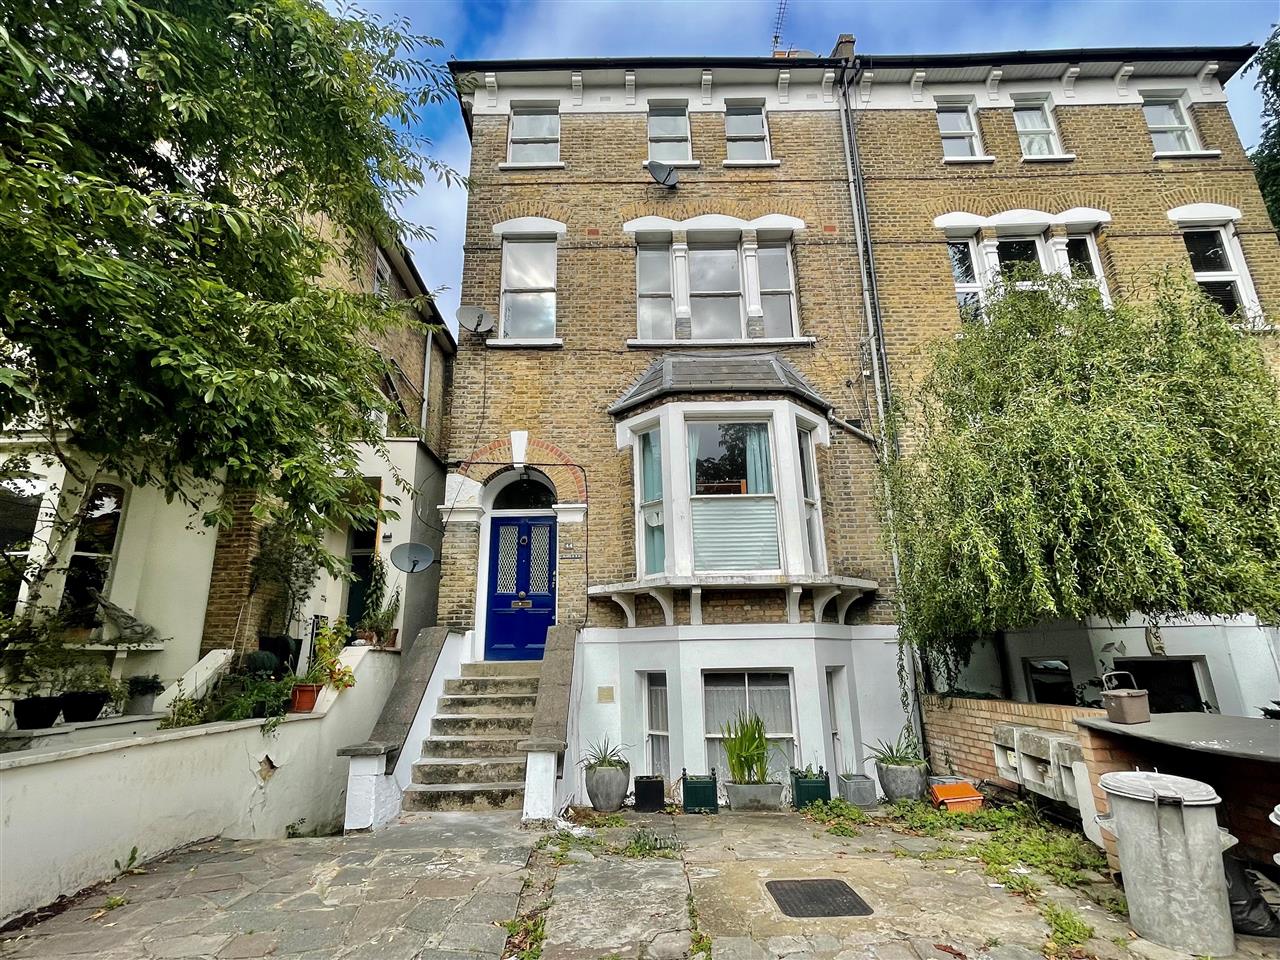 AVAILABLE 25TH OCTOBER 2022 (POSSIBLY SOONER). VIDEO TOUR AVAILABLE. Located opposite Carleton Road is this well presented and contemporary first floor UNFURNISHED converted flat within walking distance of Tufnell Park underground station (Northern Line) and the local shopping, recreational and ...